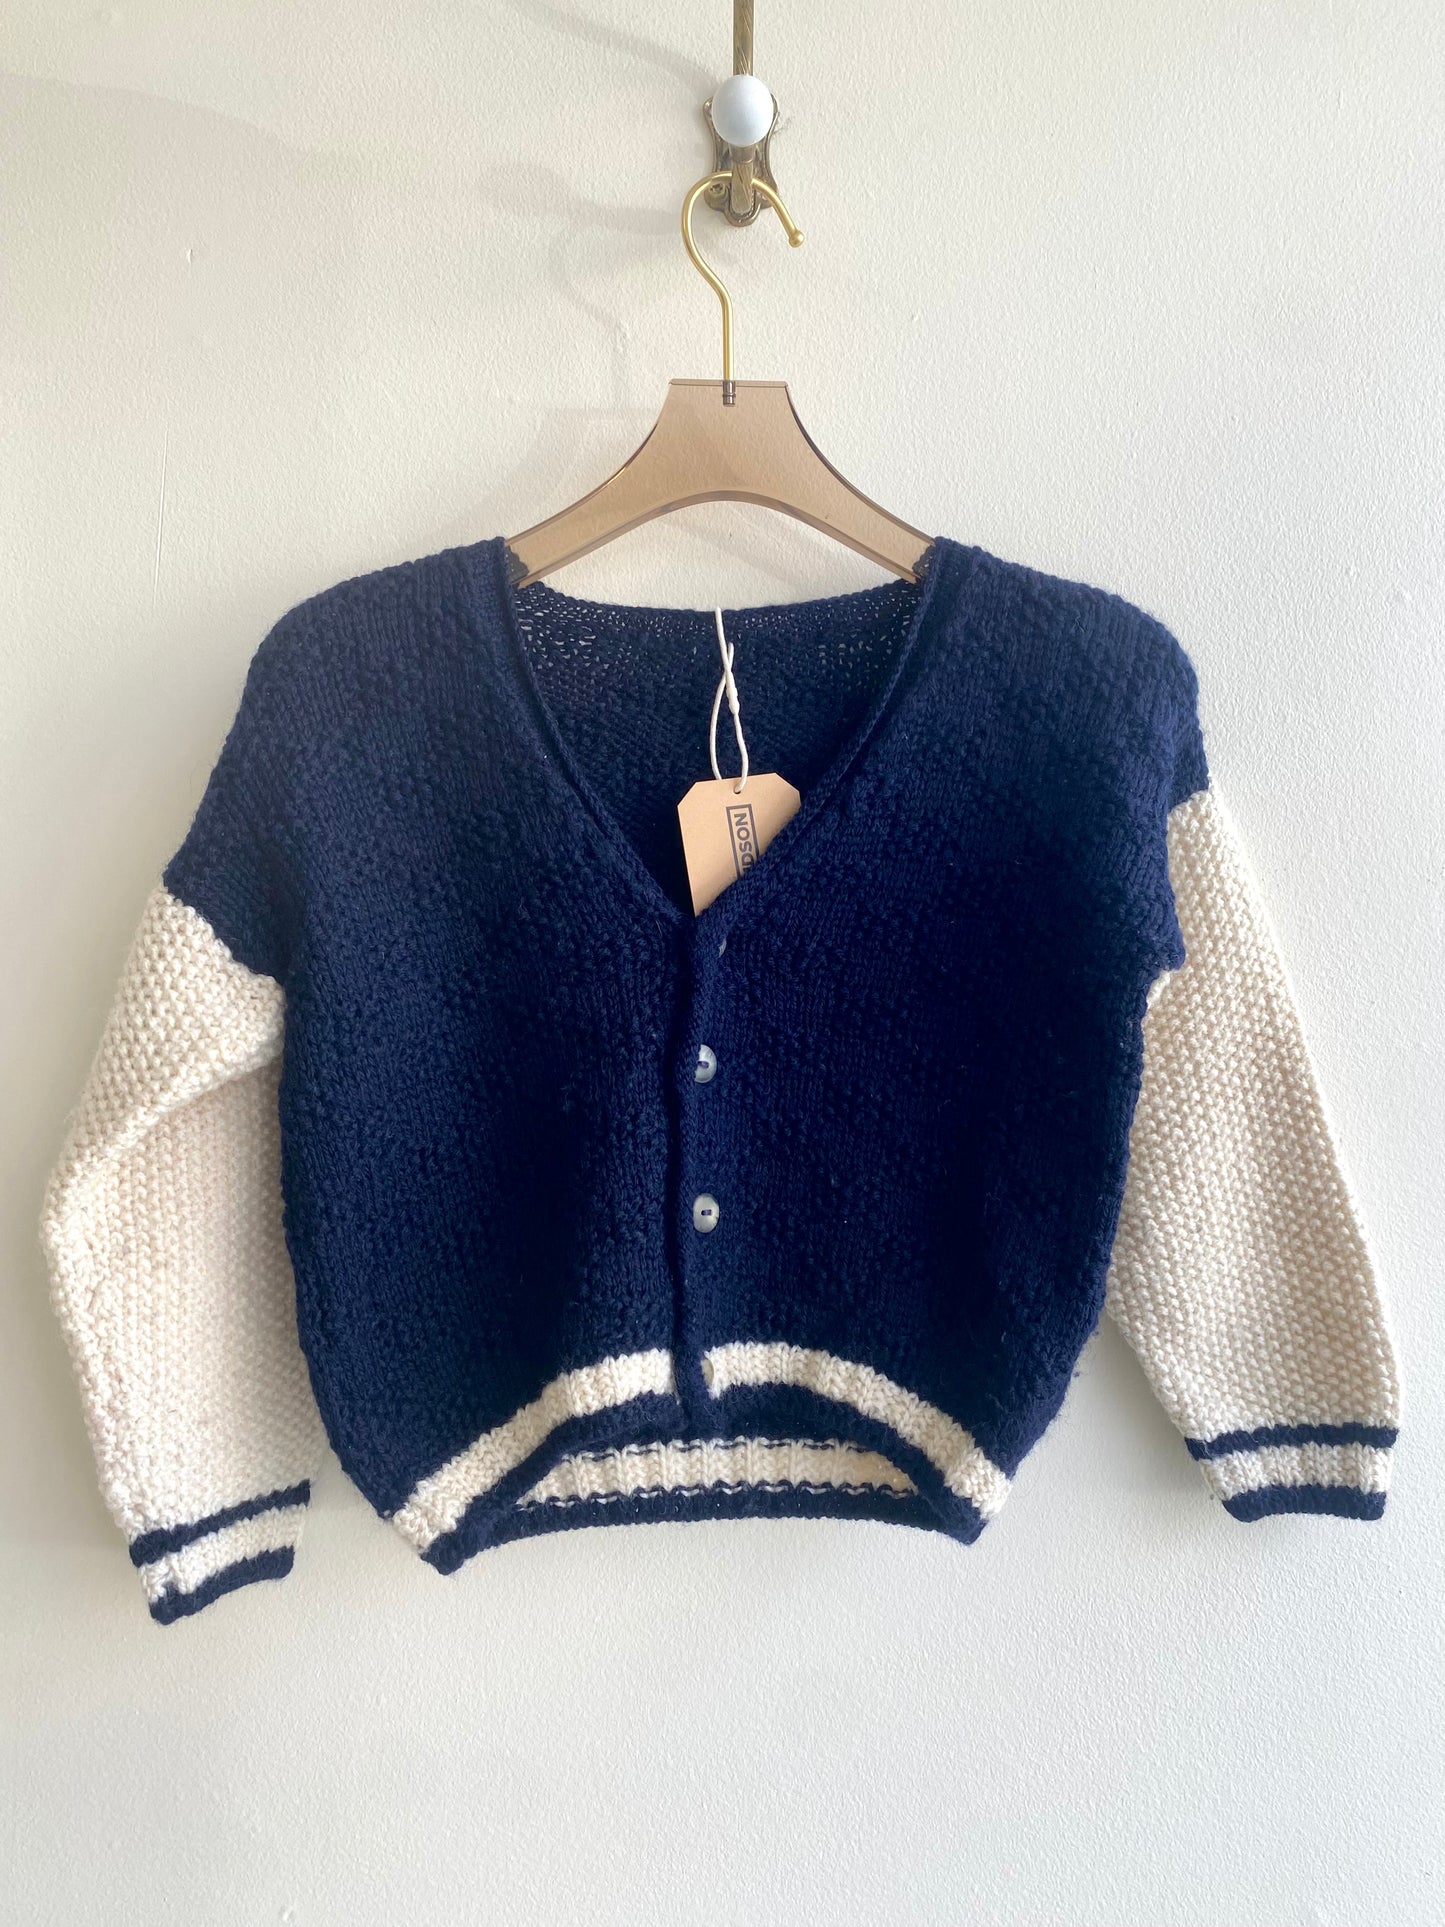 Kids Hand-Knit Wool Sweater by Cattavelli